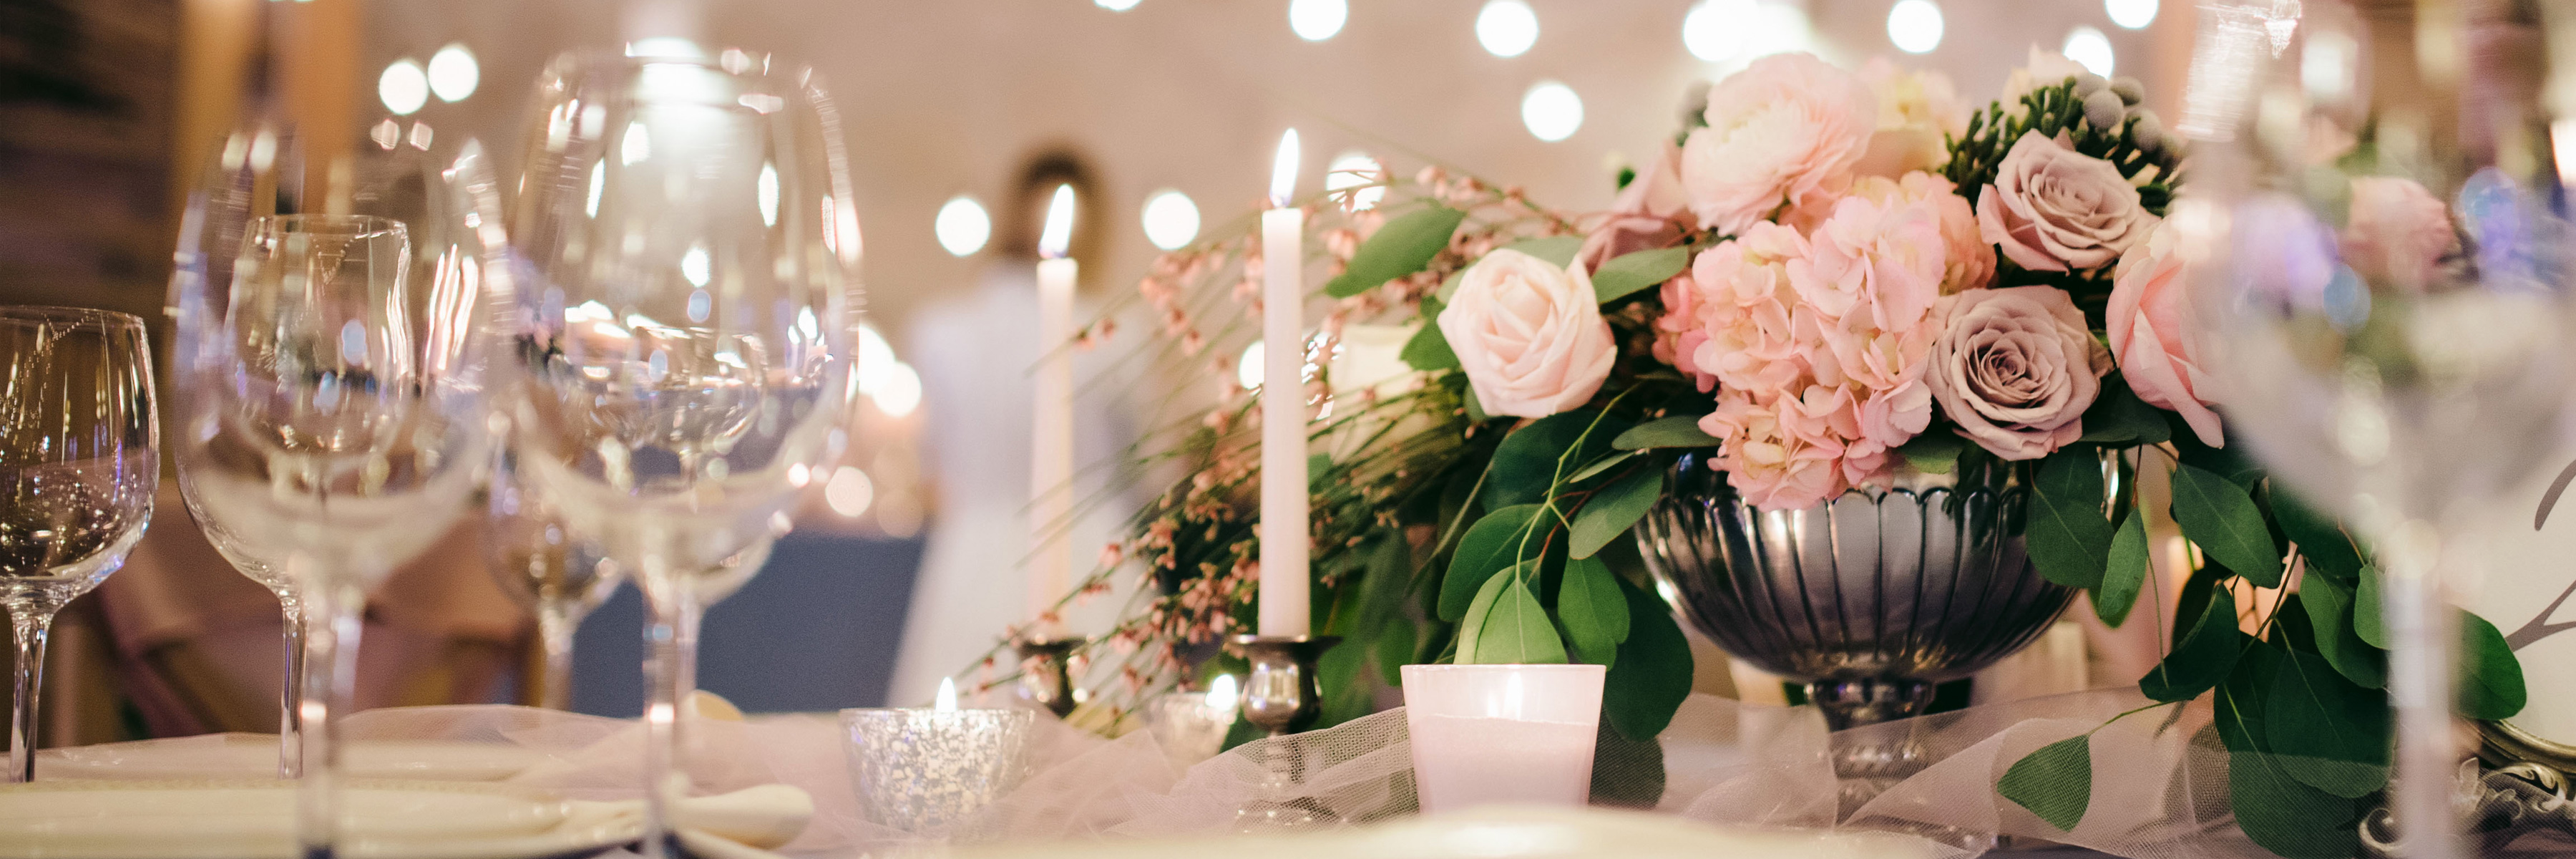 wedding place setting and centerpiece